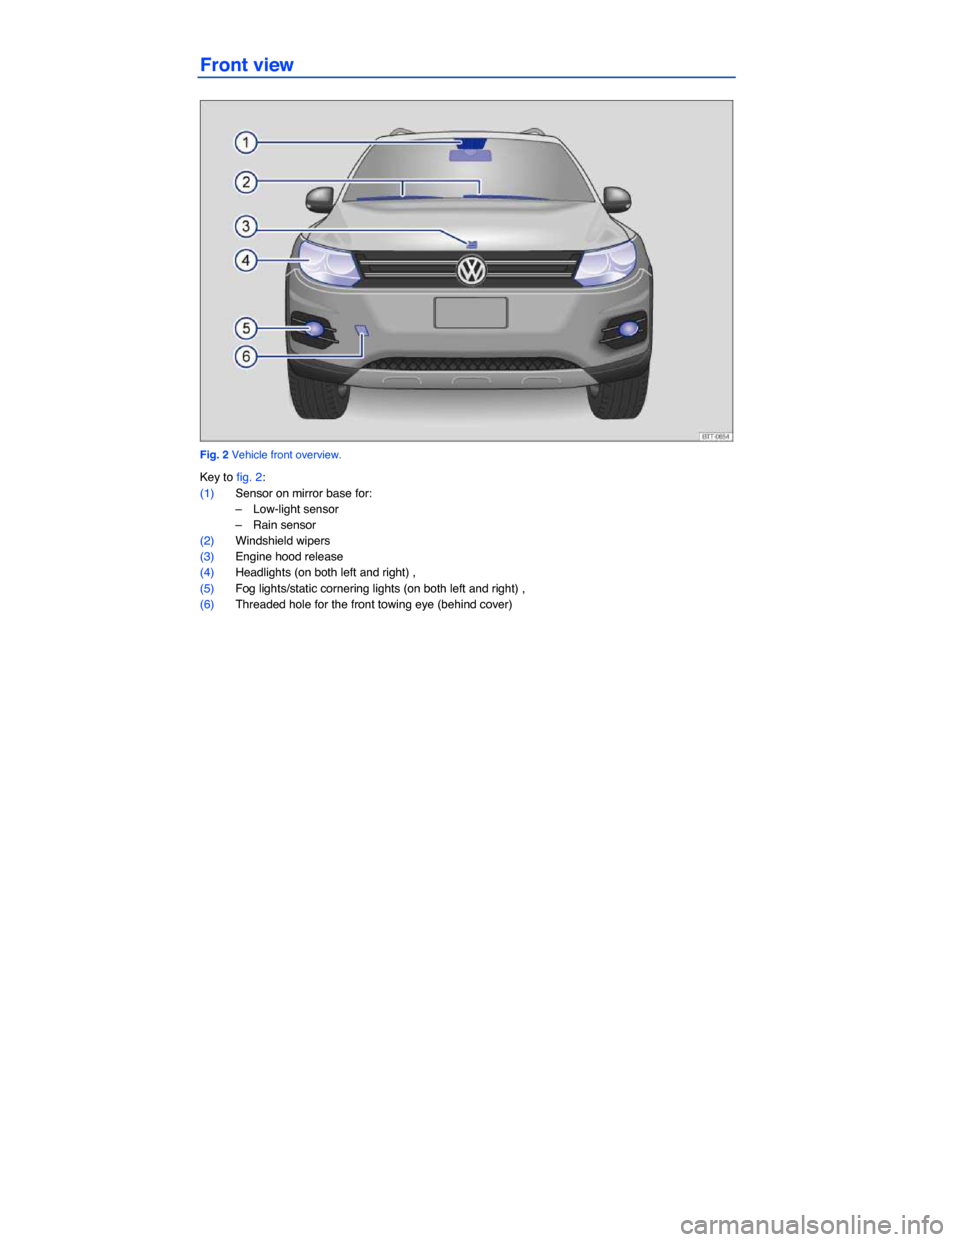 VOLKSWAGEN TIGUAN 2014 1.G Owners Manual  
 
Front view 
 
Fig. 2 Vehicle front overview. 
Key to fig. 2: 
(1) Sensor on mirror base for: 
–  Low-light sensor  
–  Rain sensor  
(2) Windshield wipers  
(3) Engine hood release  
(4) Headl